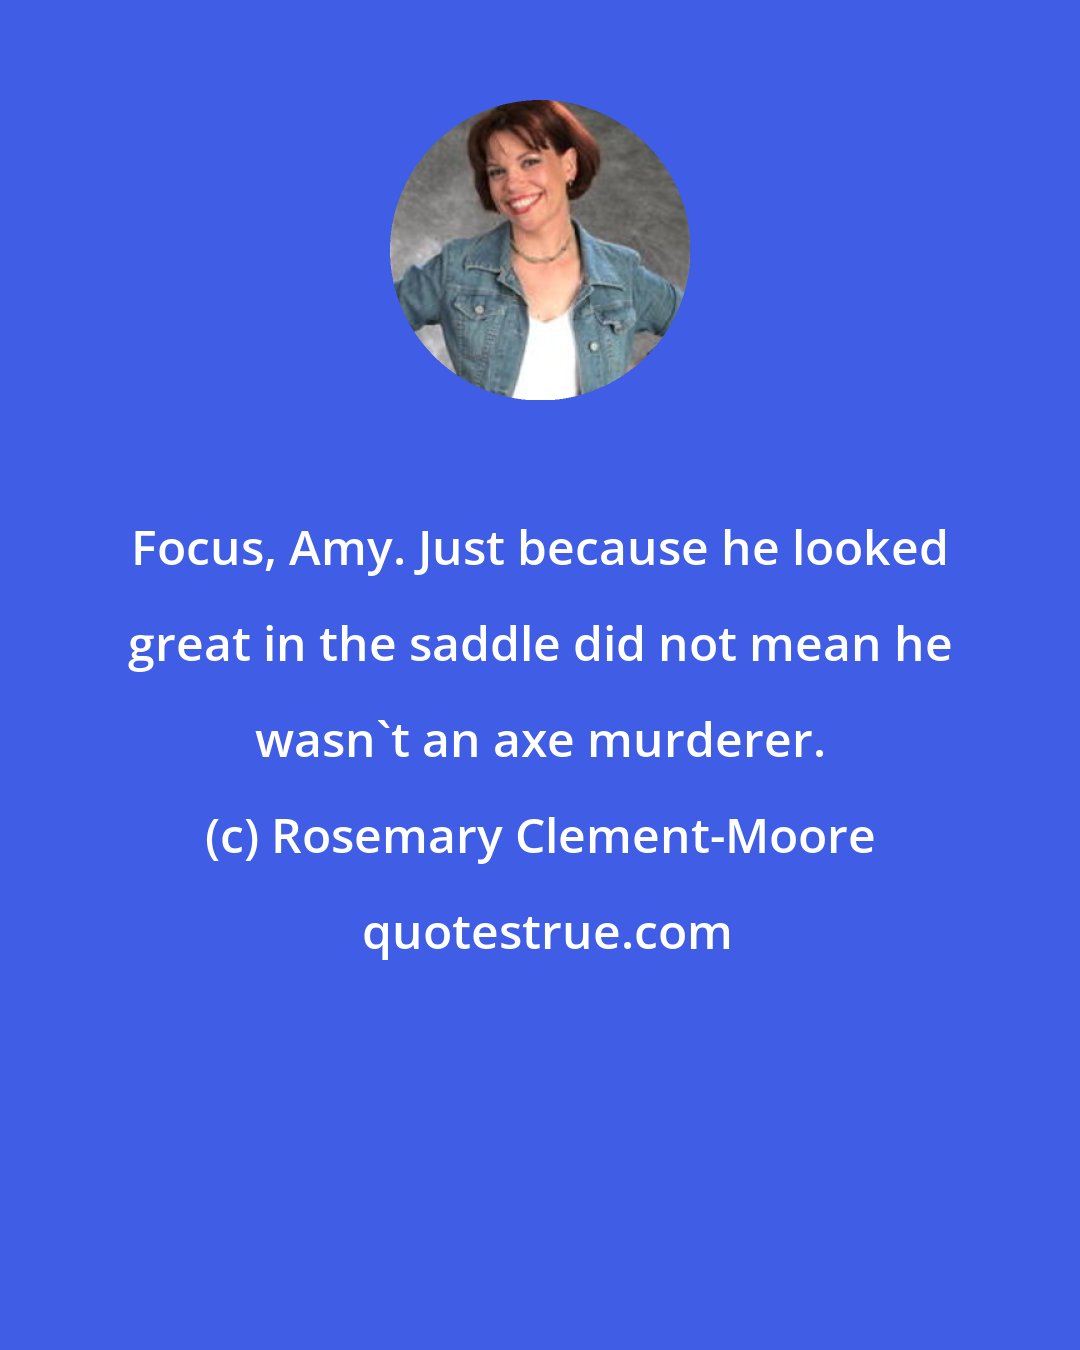 Rosemary Clement-Moore: Focus, Amy. Just because he looked great in the saddle did not mean he wasn't an axe murderer.